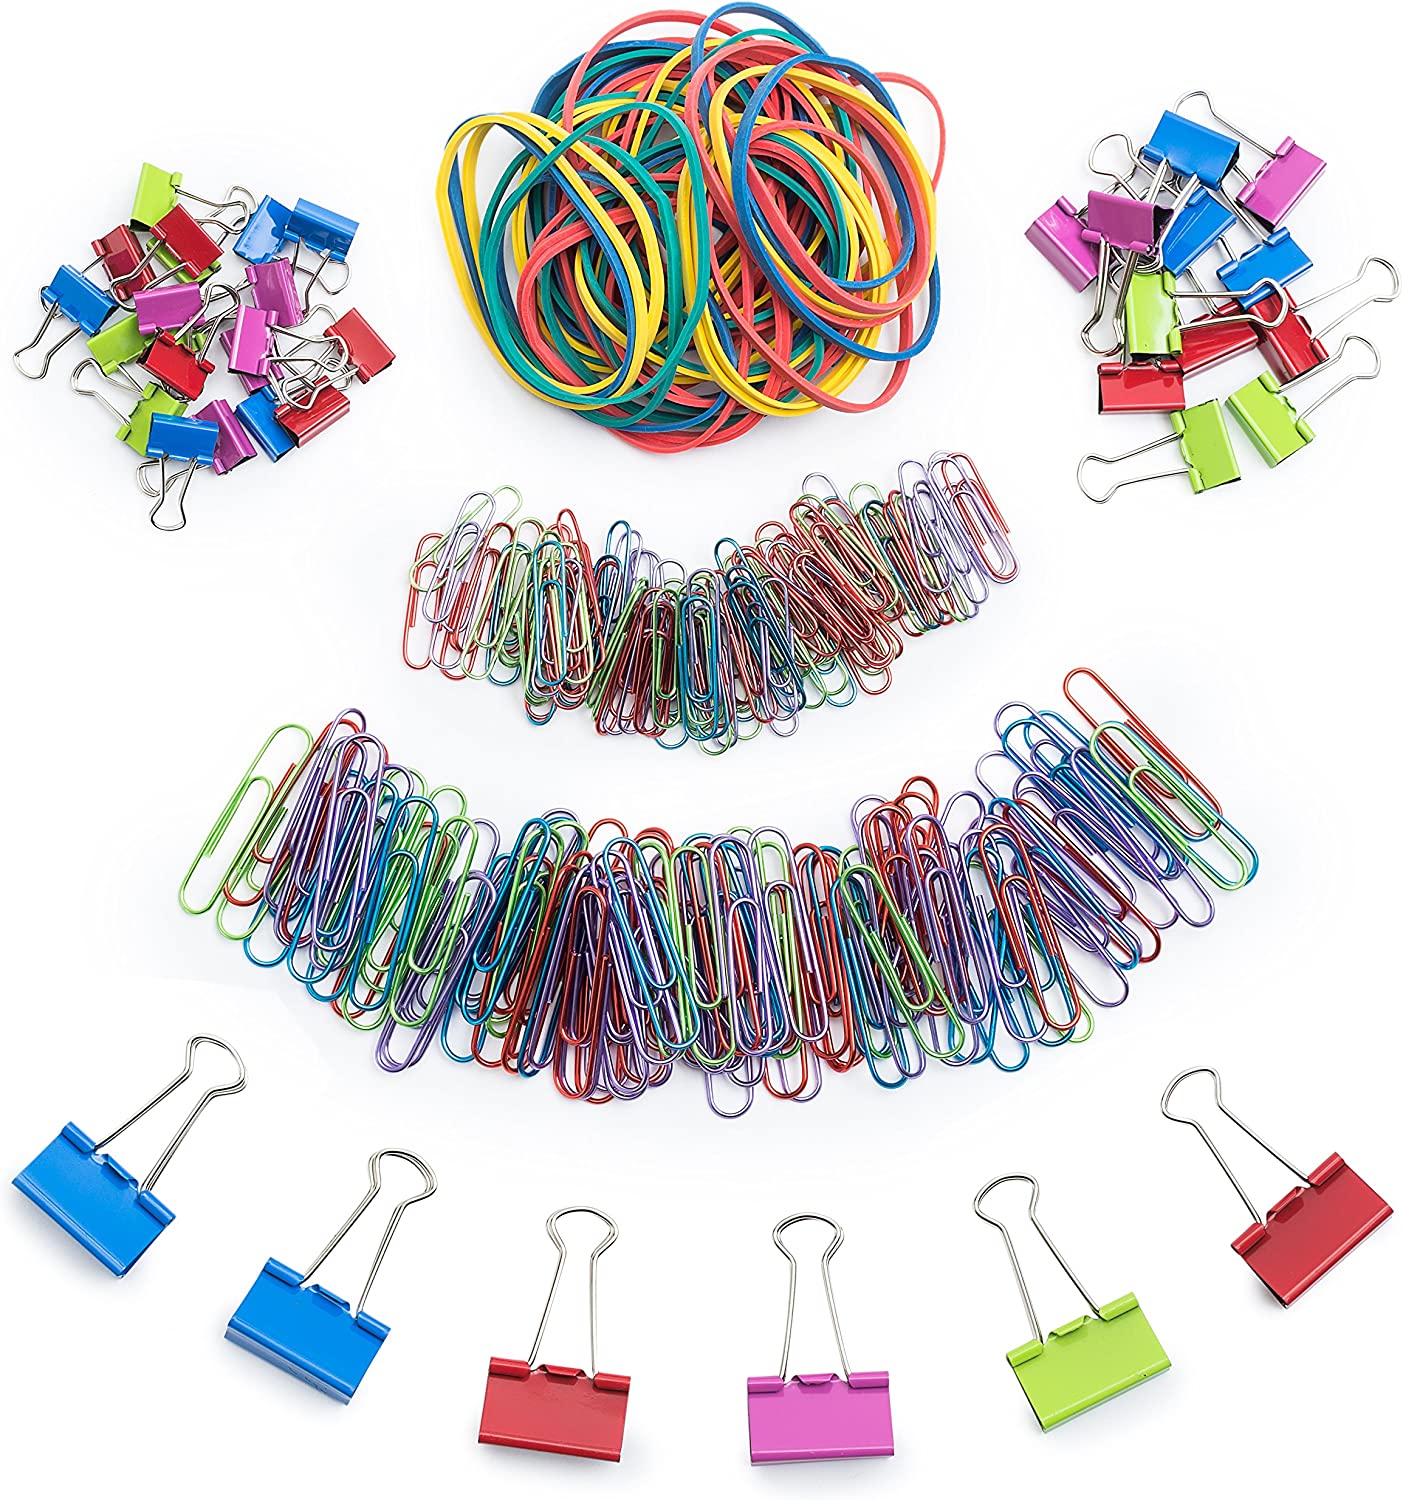 Mr. Pen- Assorted Colored Binder Clips, Paper Clips, Rubber Bands, Paper  Clips Jumbo, Paper Clips Small, Binder Clips Small, Binder Clips Medium, Binder  Clips Mini, Paper Clamps, Foldback Clips - Mr. Pen